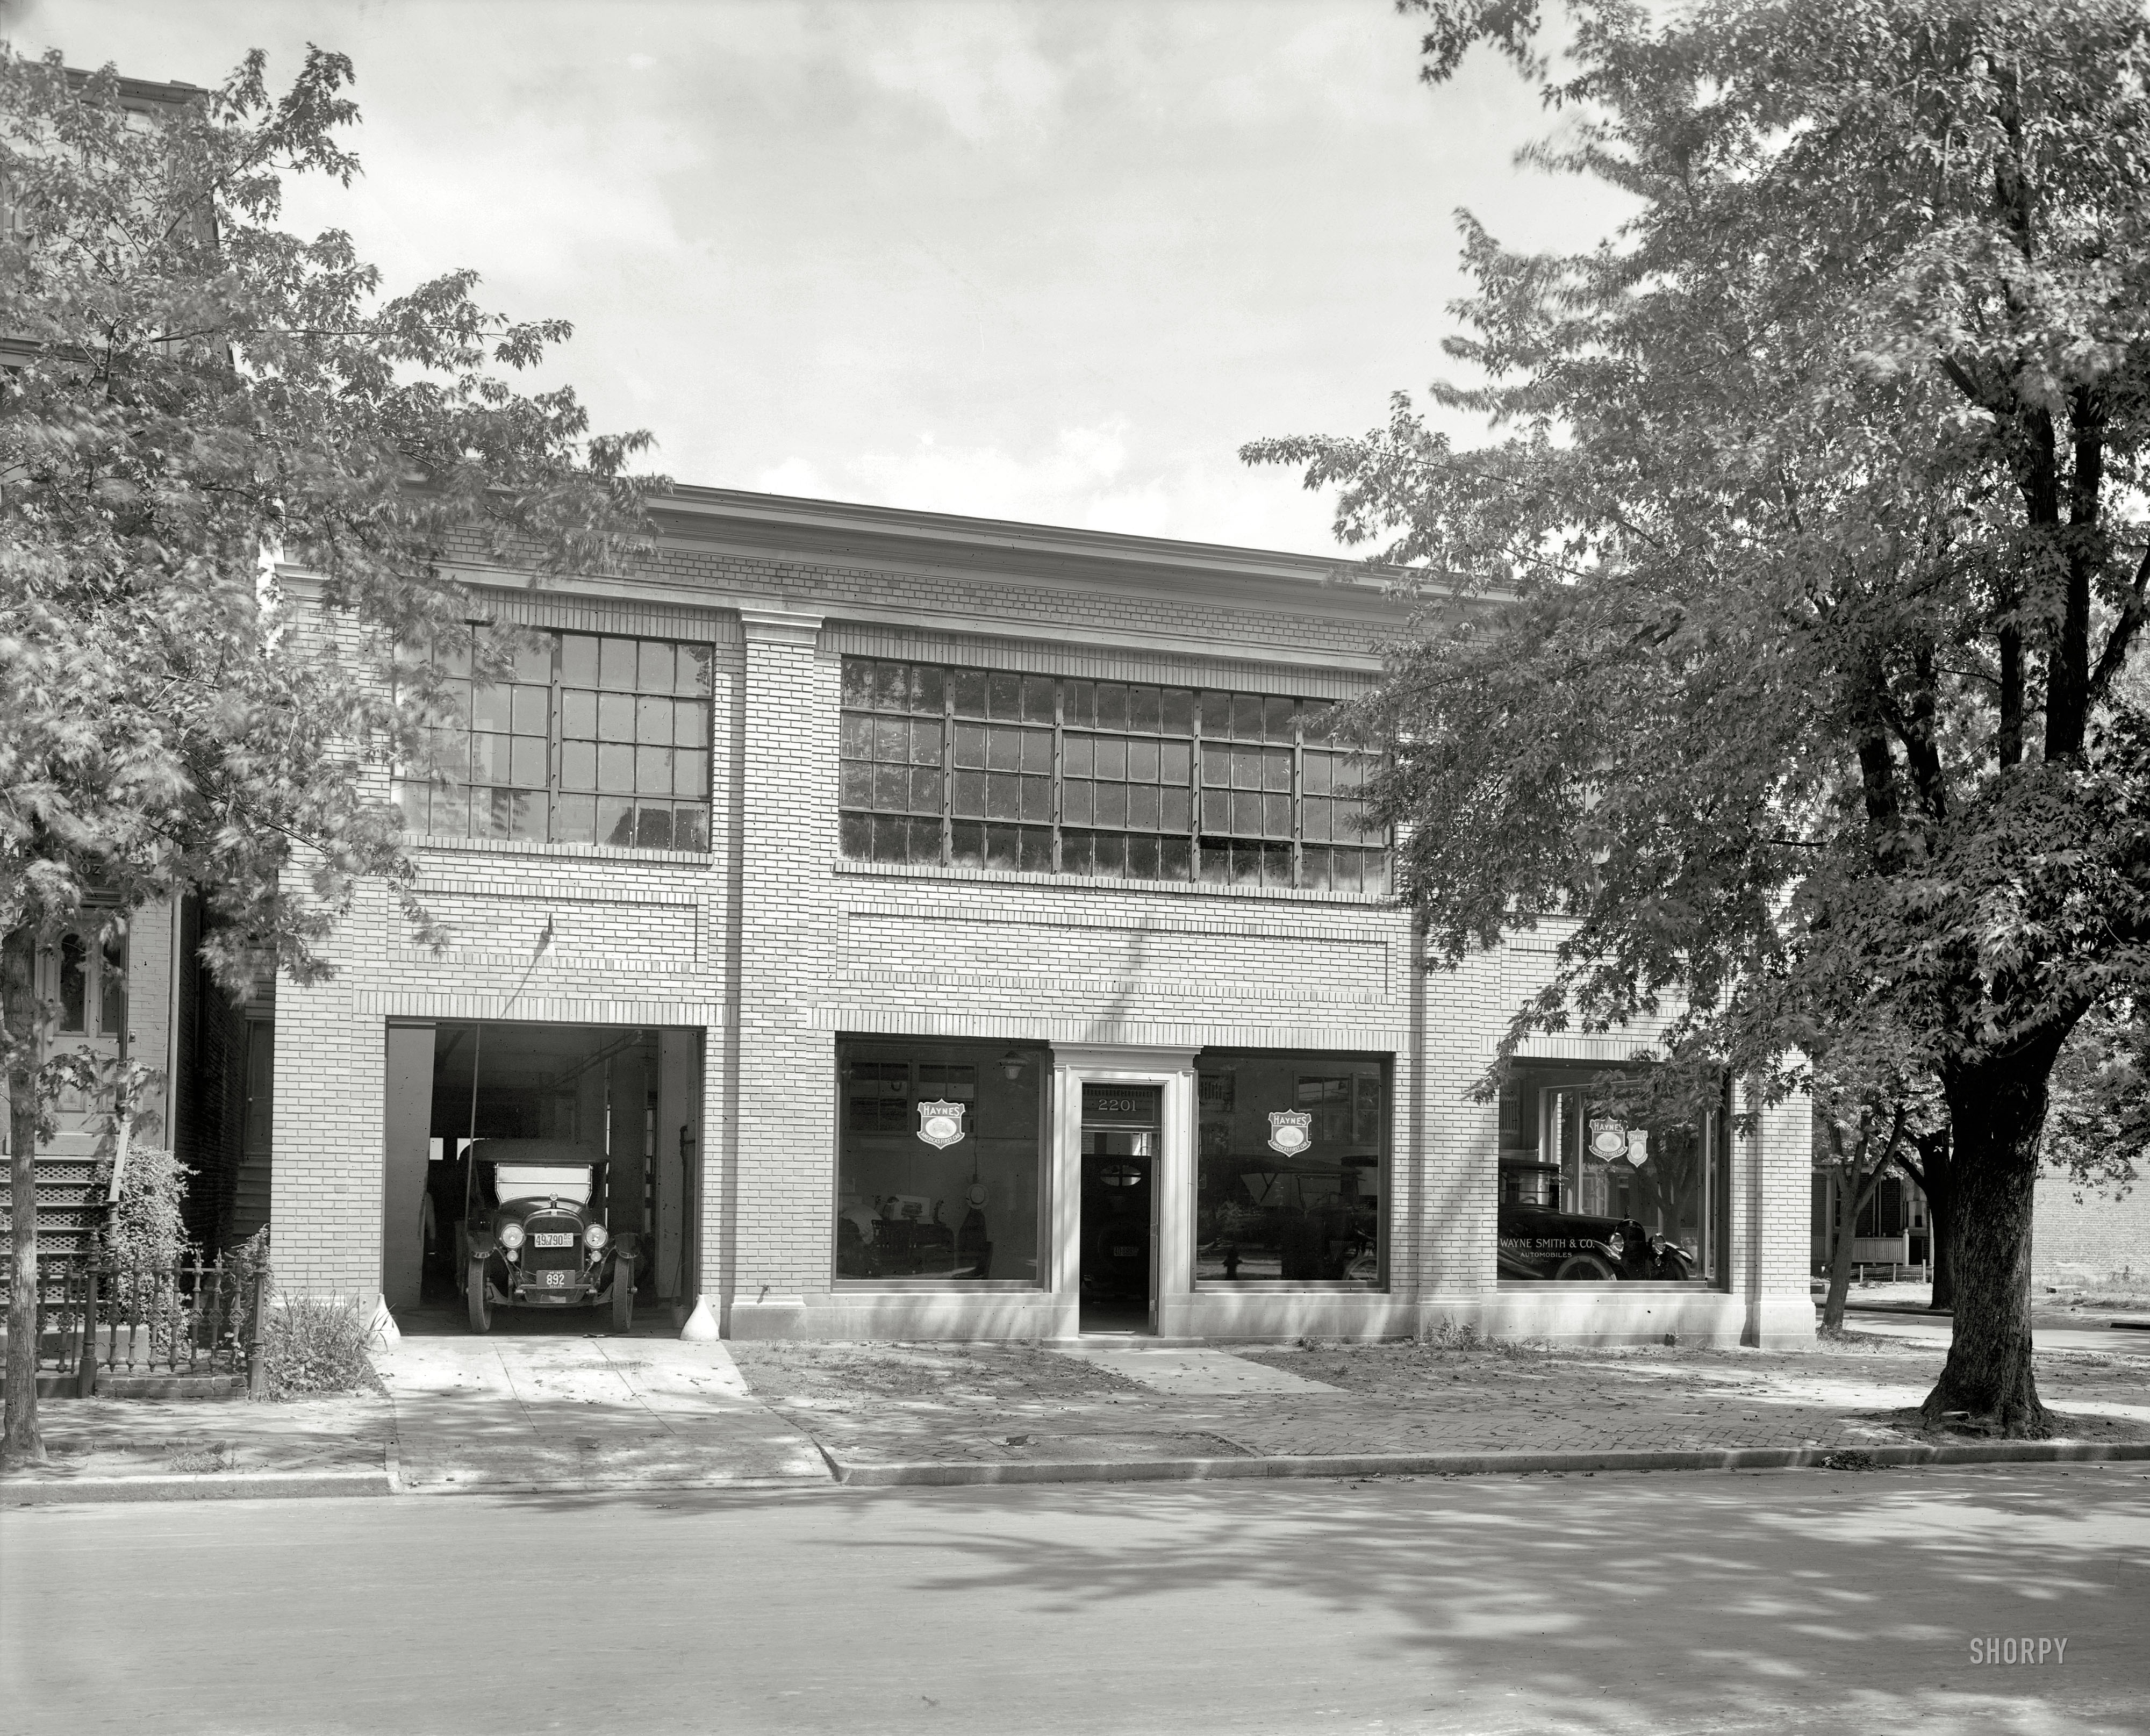 "Wayne Smith Auto Co., front." Mr. Smith went to Washington, and built this dealership at the corner of M and 22nd. A street view of the building shortly after its completion in 1920. National Photo Company glass negative. View full size.